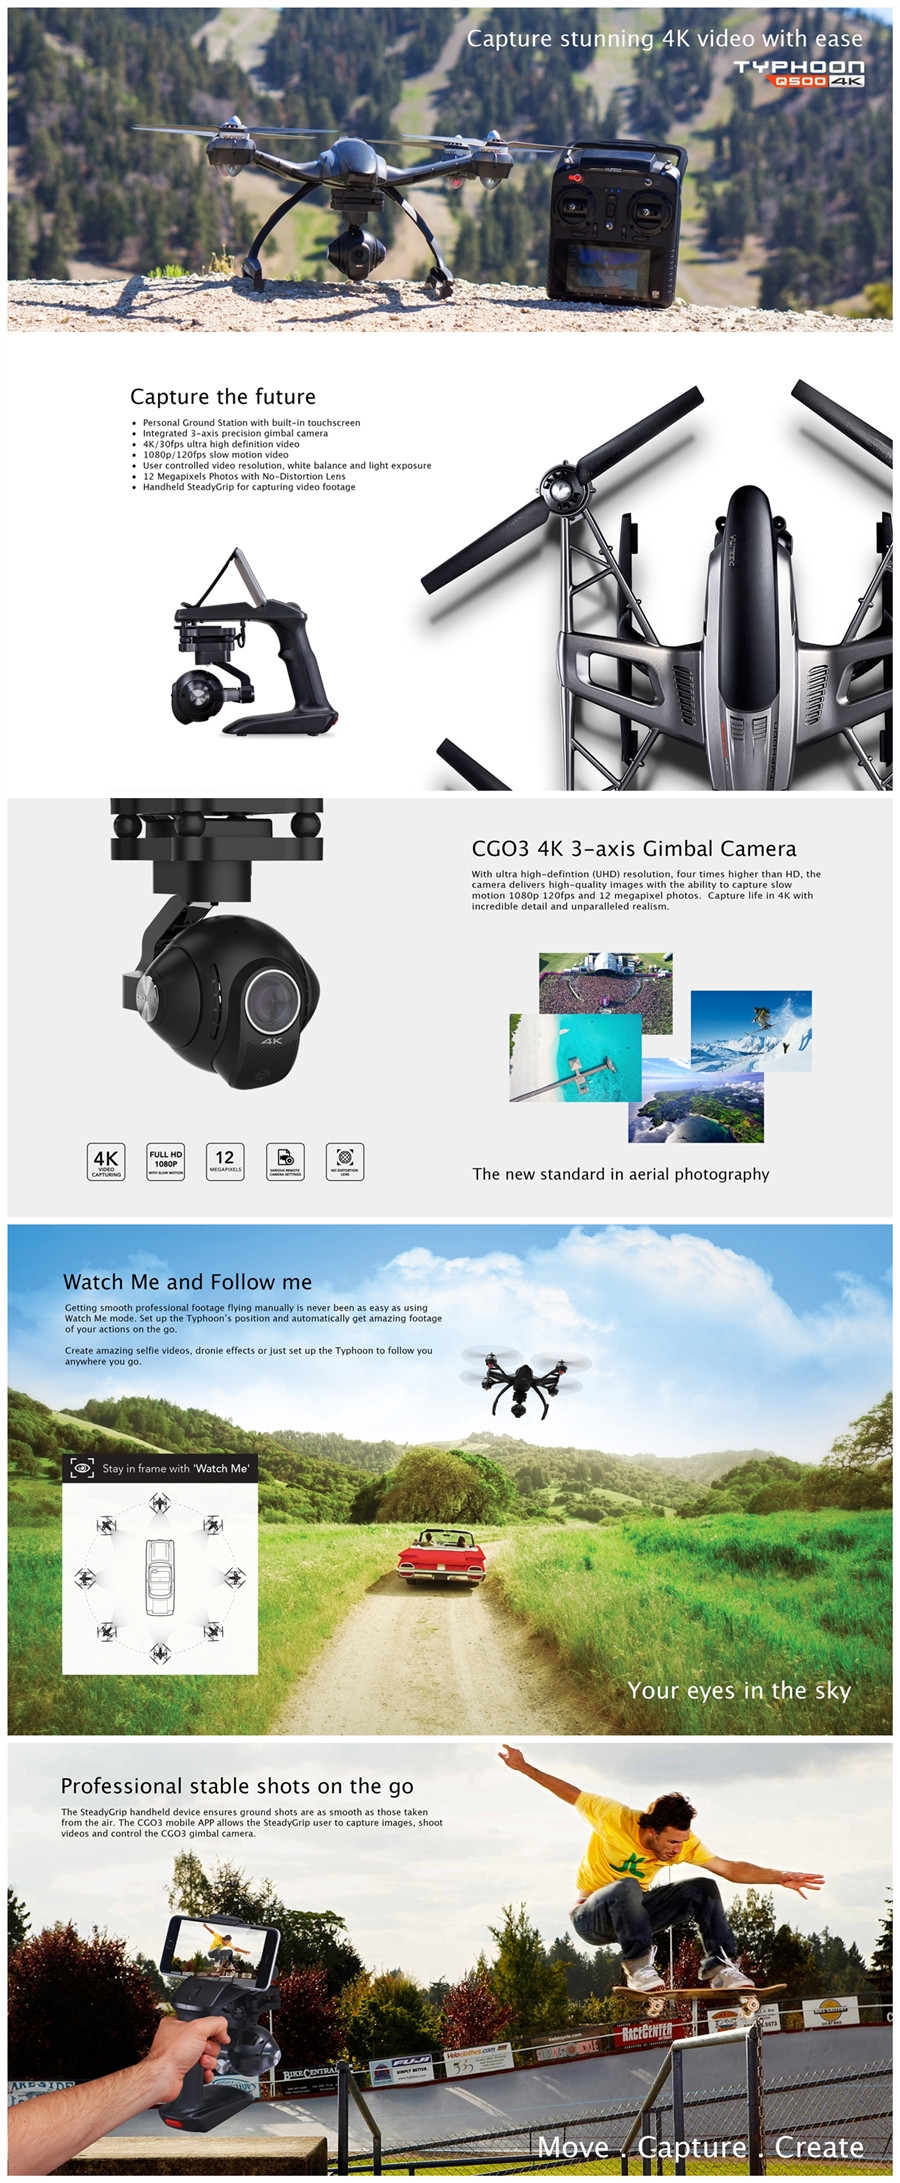 Yuneec Typhoon Q500 Double Electric 5.8G FPV With 4K Camera CGO3 3-Axis Gimbal RC Quadcopter RTF